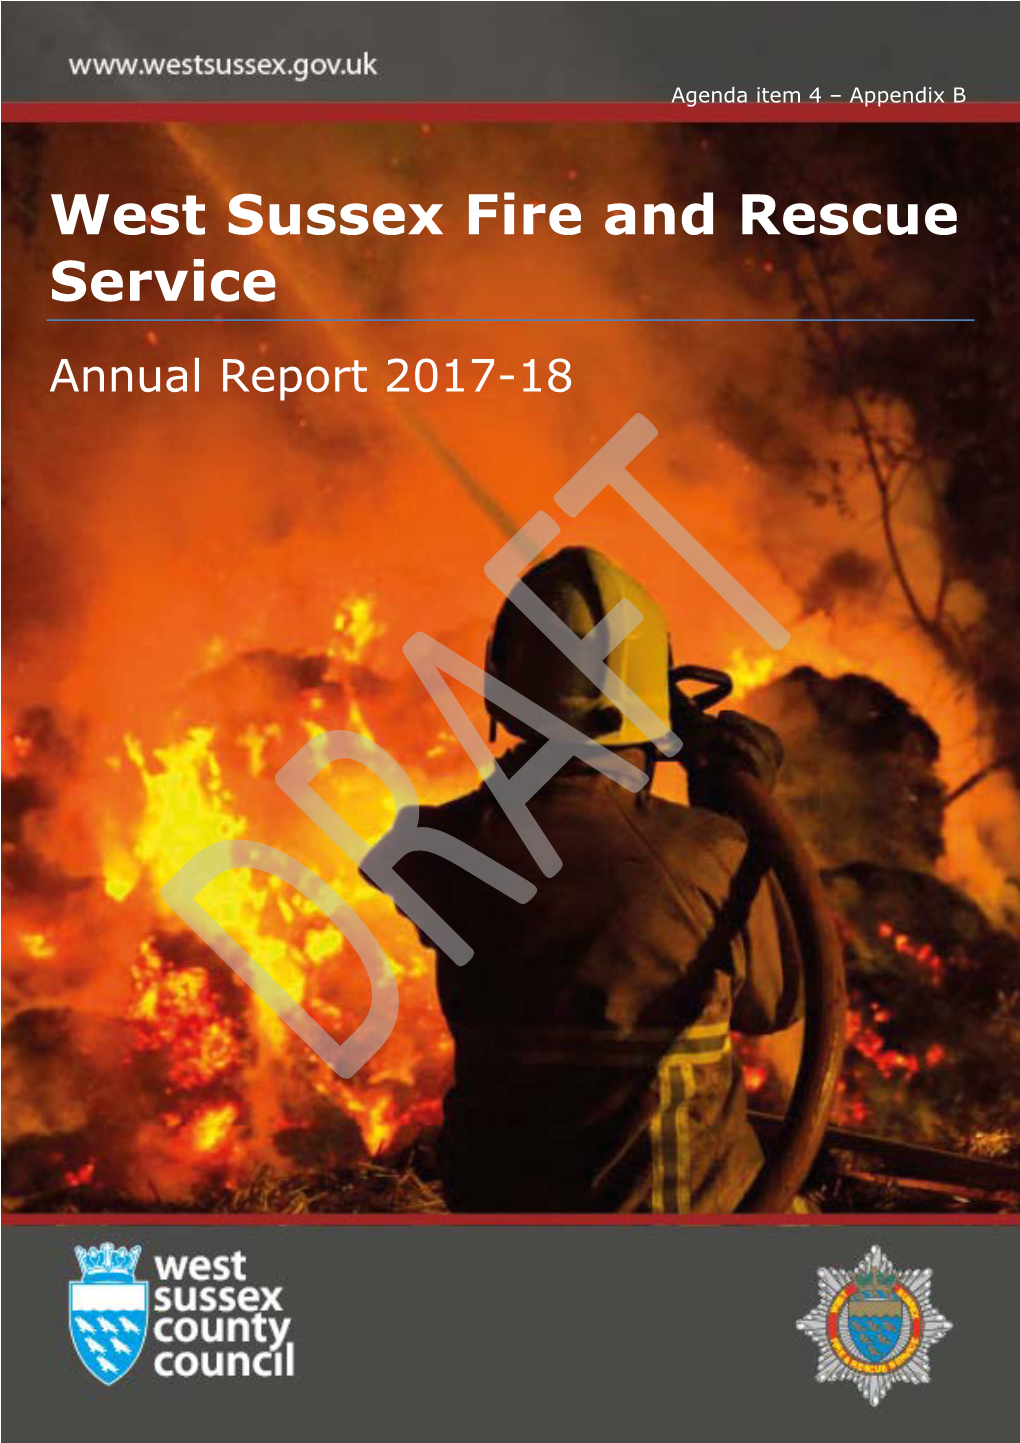 West Sussex Fire and Rescue Service Annual Report 2017-18